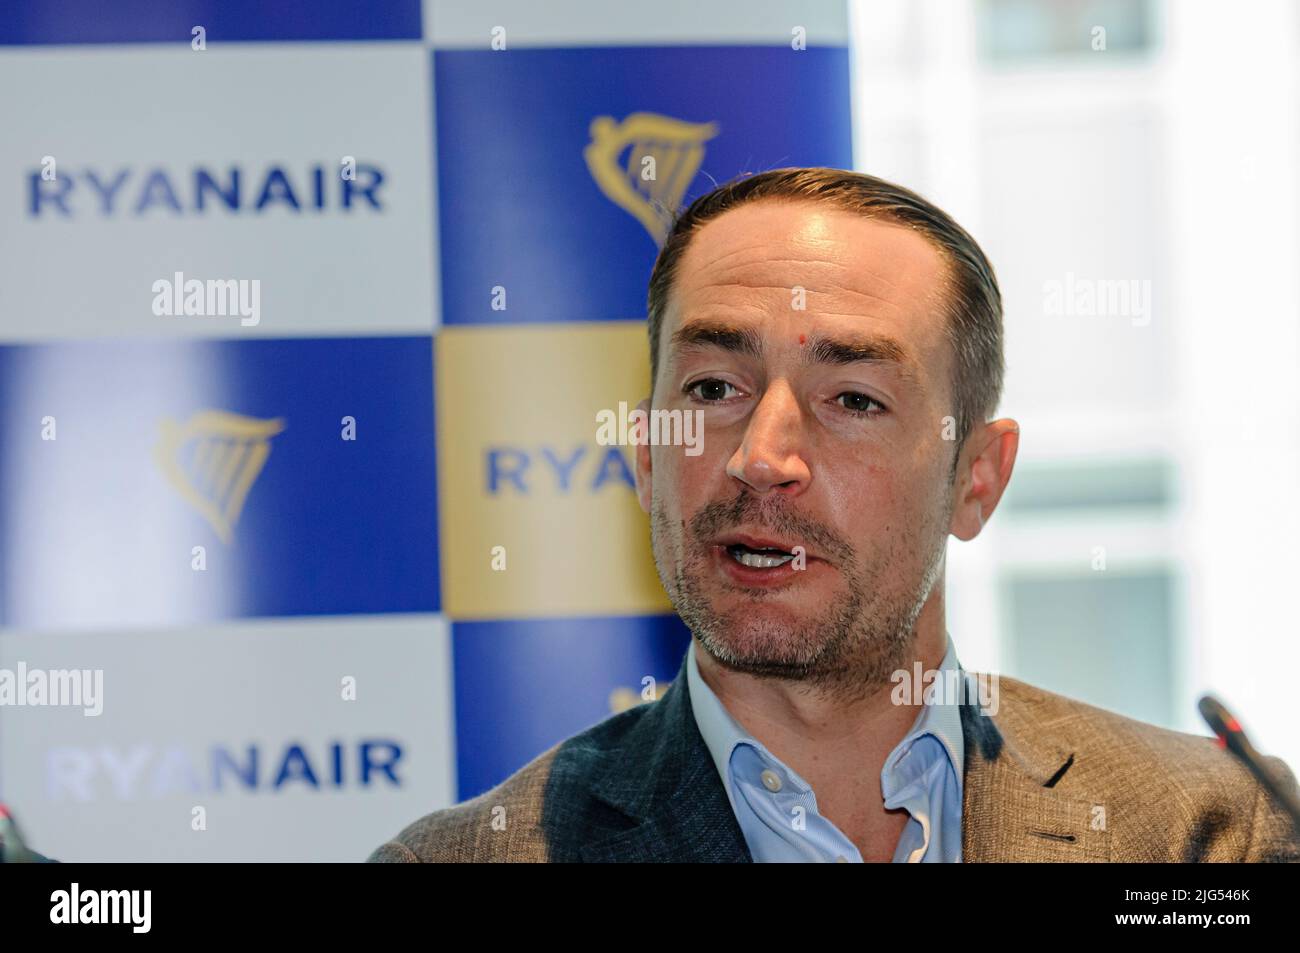 Belfast, Northern Ireland, UK. 7th July 2022 - Jason McGuinness, Commercial Director at Ryanair, announces Ryanair's return to Belfast International Airport with the introduction of 12 routes, and two aircraft based at Belfast. Stock Photo